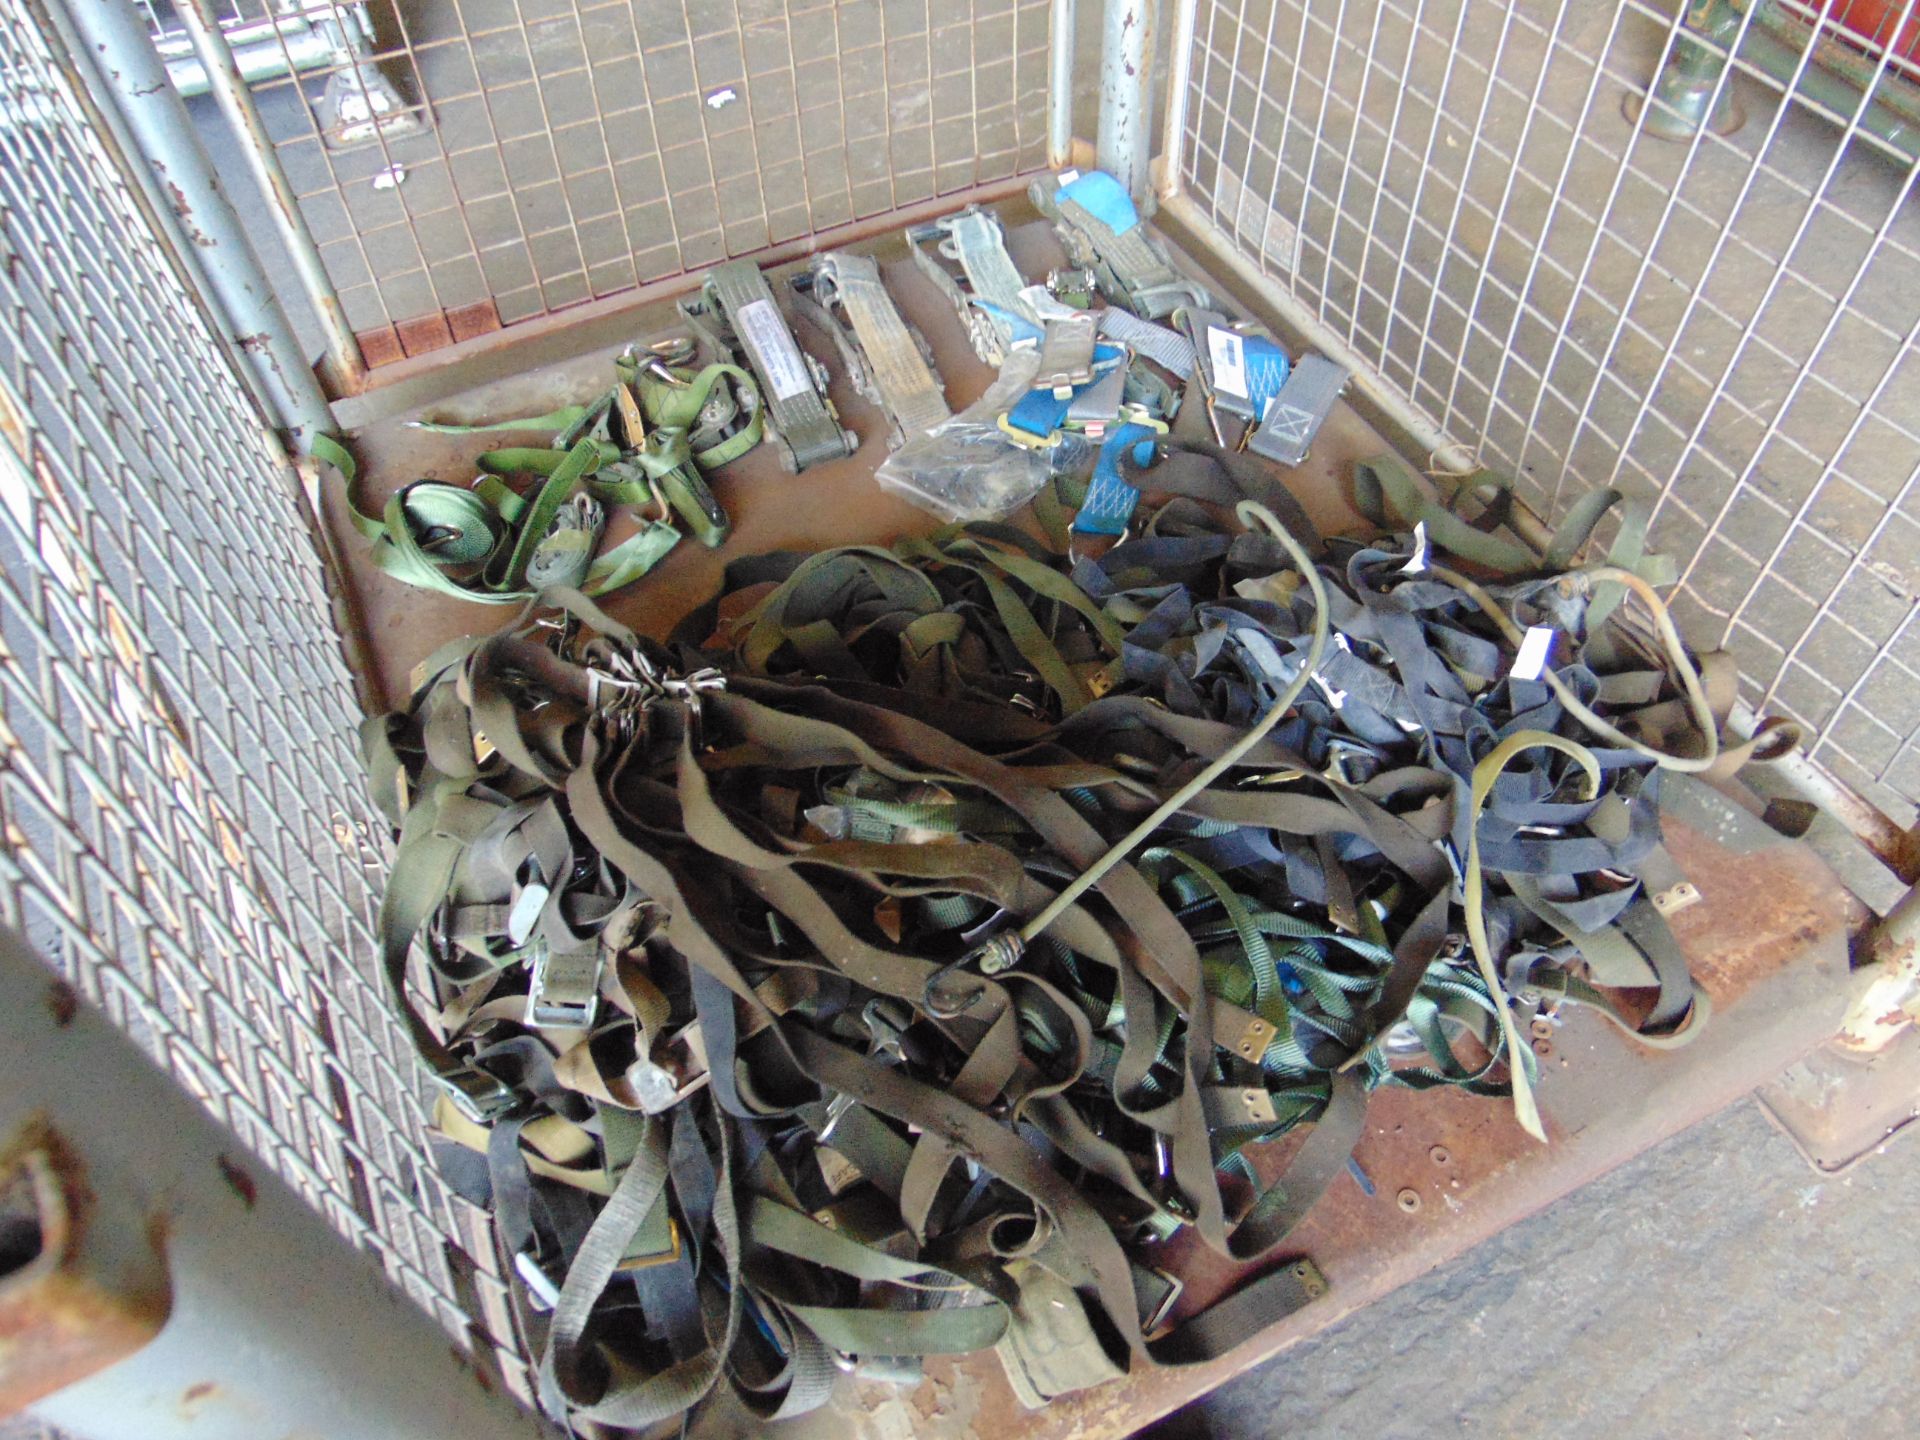 Stillage of Strapping, Ratchets etc. - Image 5 of 6